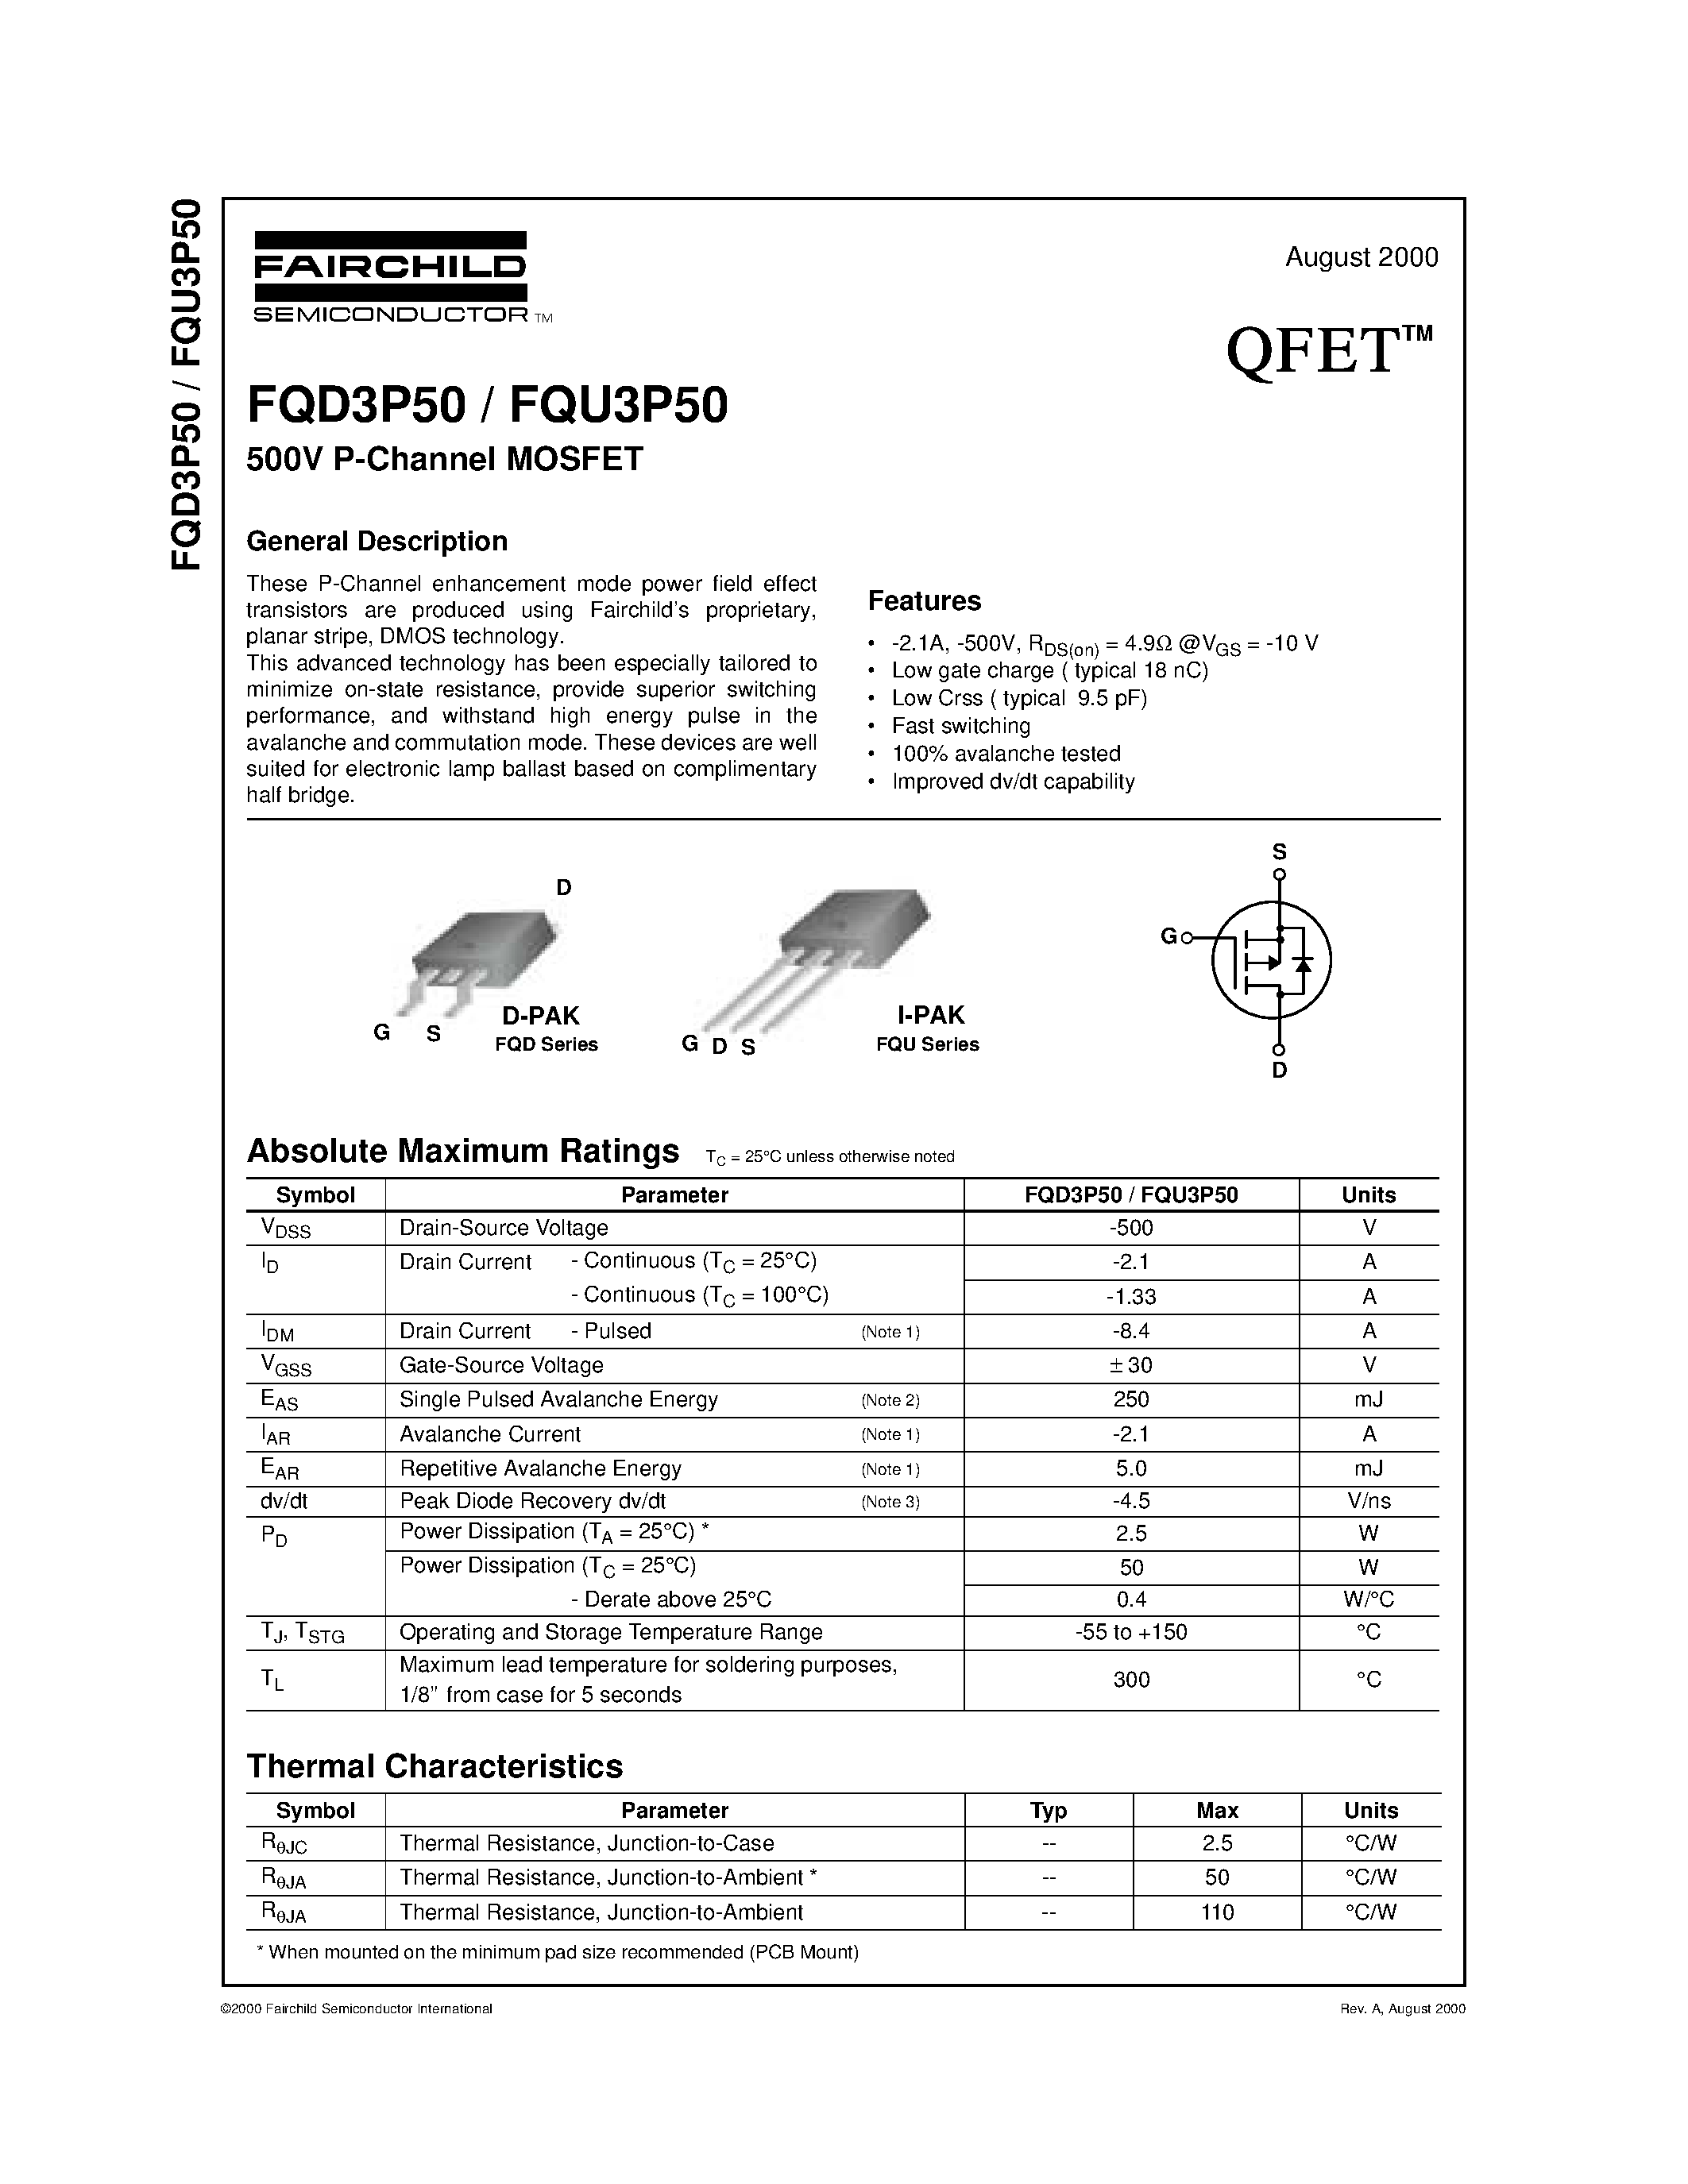 Datasheet FQD3P50 - 500V P-Channel MOSFET page 1